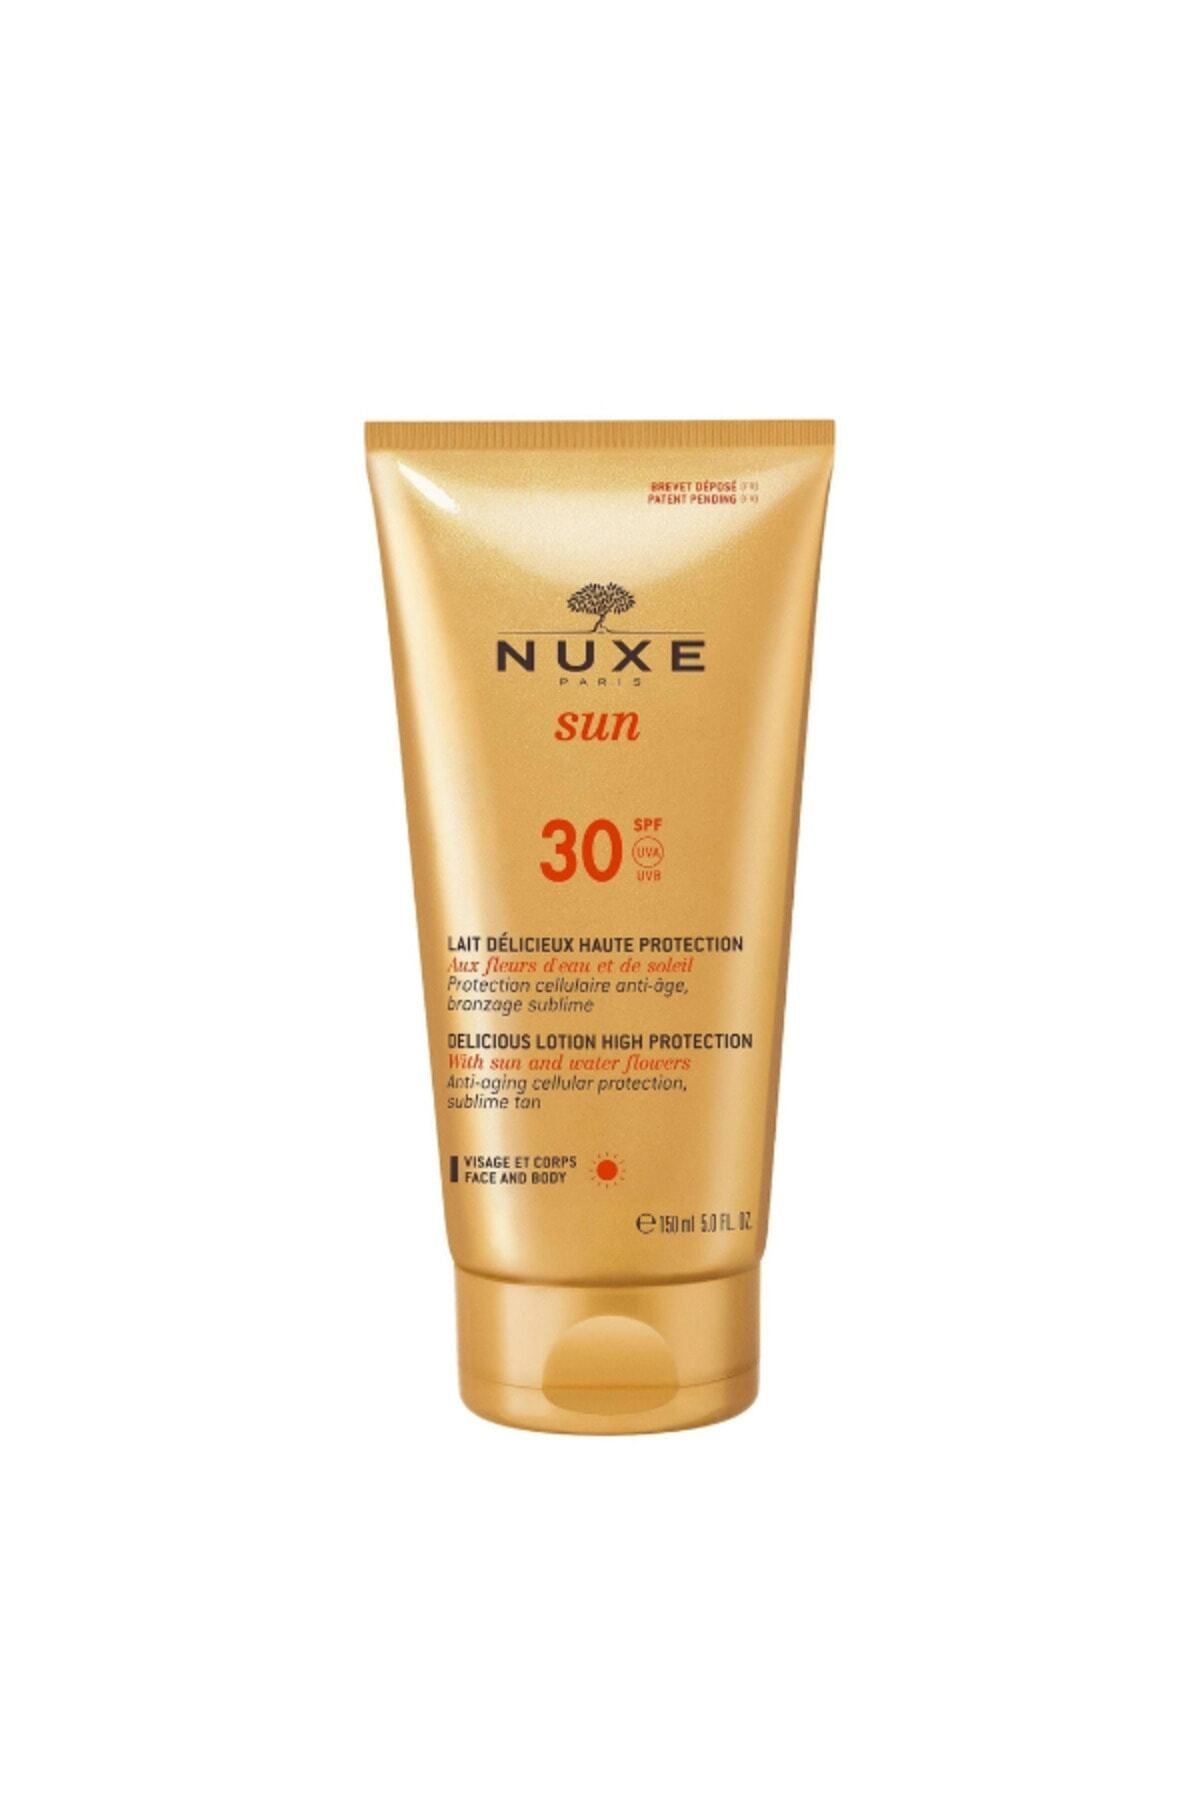 Nuxe Sun Lait Delicieux SPF 30 150 ml Face and Body - Tinted Sunscreen Shooting146